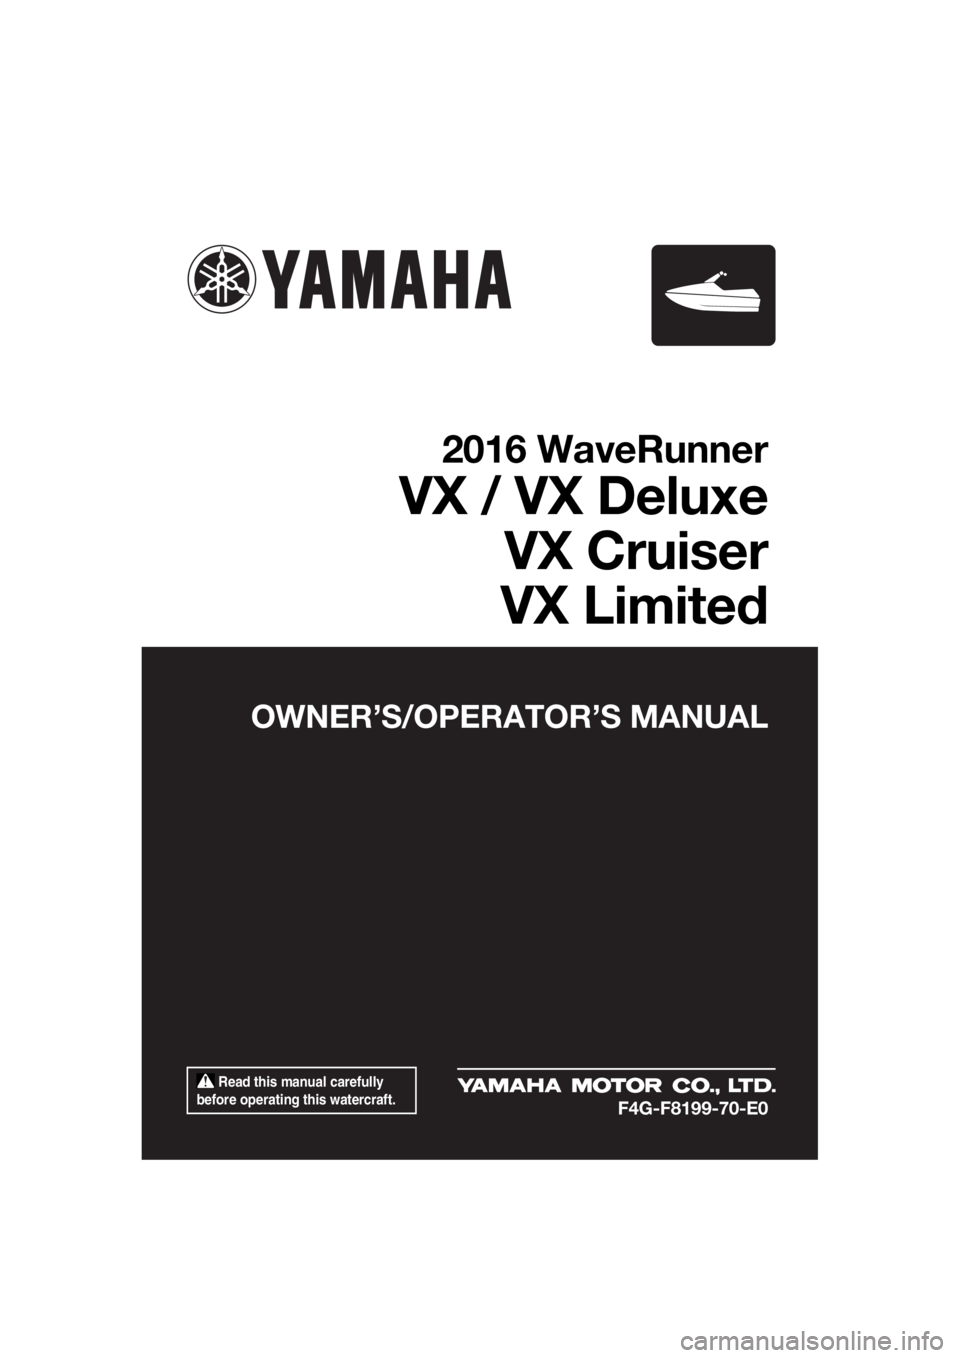 YAMAHA VX LIMITED 2016  Owners Manual  Read this manual carefully 
before operating this watercraft.
OWNER’S/OPERATOR’S MANUAL
2016 WaveRunner
VX / VX Deluxe
VX Cruiser
VX Limited
F4G-F8199-70-E0
UF4G70E0.book  Page 1  Monday, Septemb